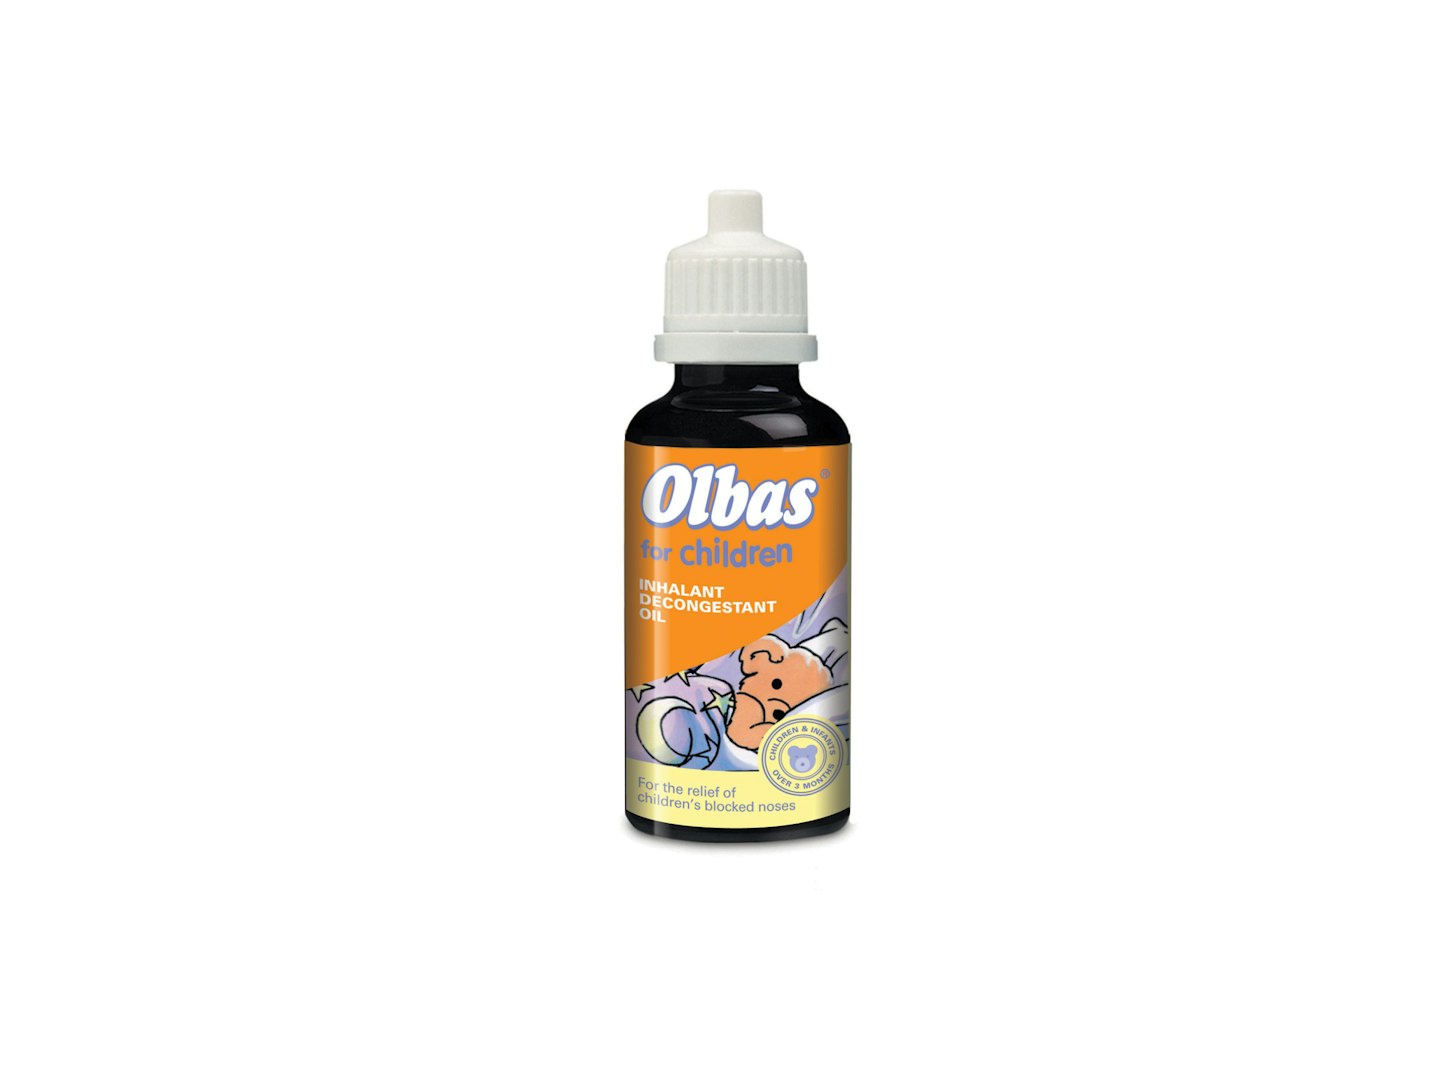 Specially formulated for infants over three months, Olbas for Children contains a combination of essential pure plant oils, including eucalyptus, mint, clove, juniperberry and cajuput to act as a gentle decongestant to relieve stuffy noses and catarrh an